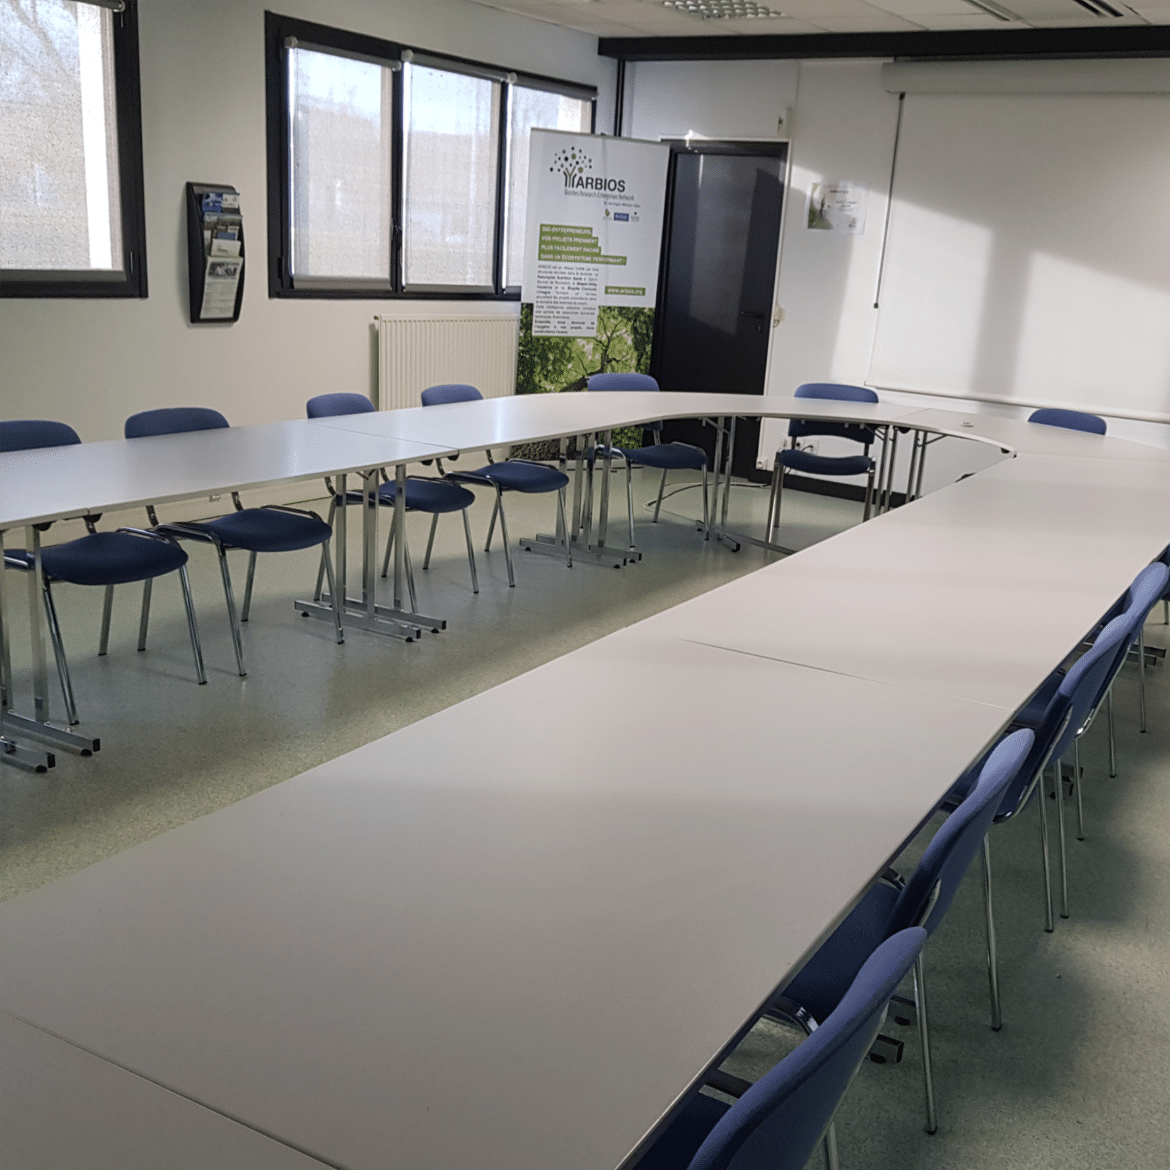 The companies in the Clermont-Limagne Biopole have access to shared services.
On the Saint-Beauzire site, two meeting rooms for 20 and 50 people can be rented alone or combined into one room [...]